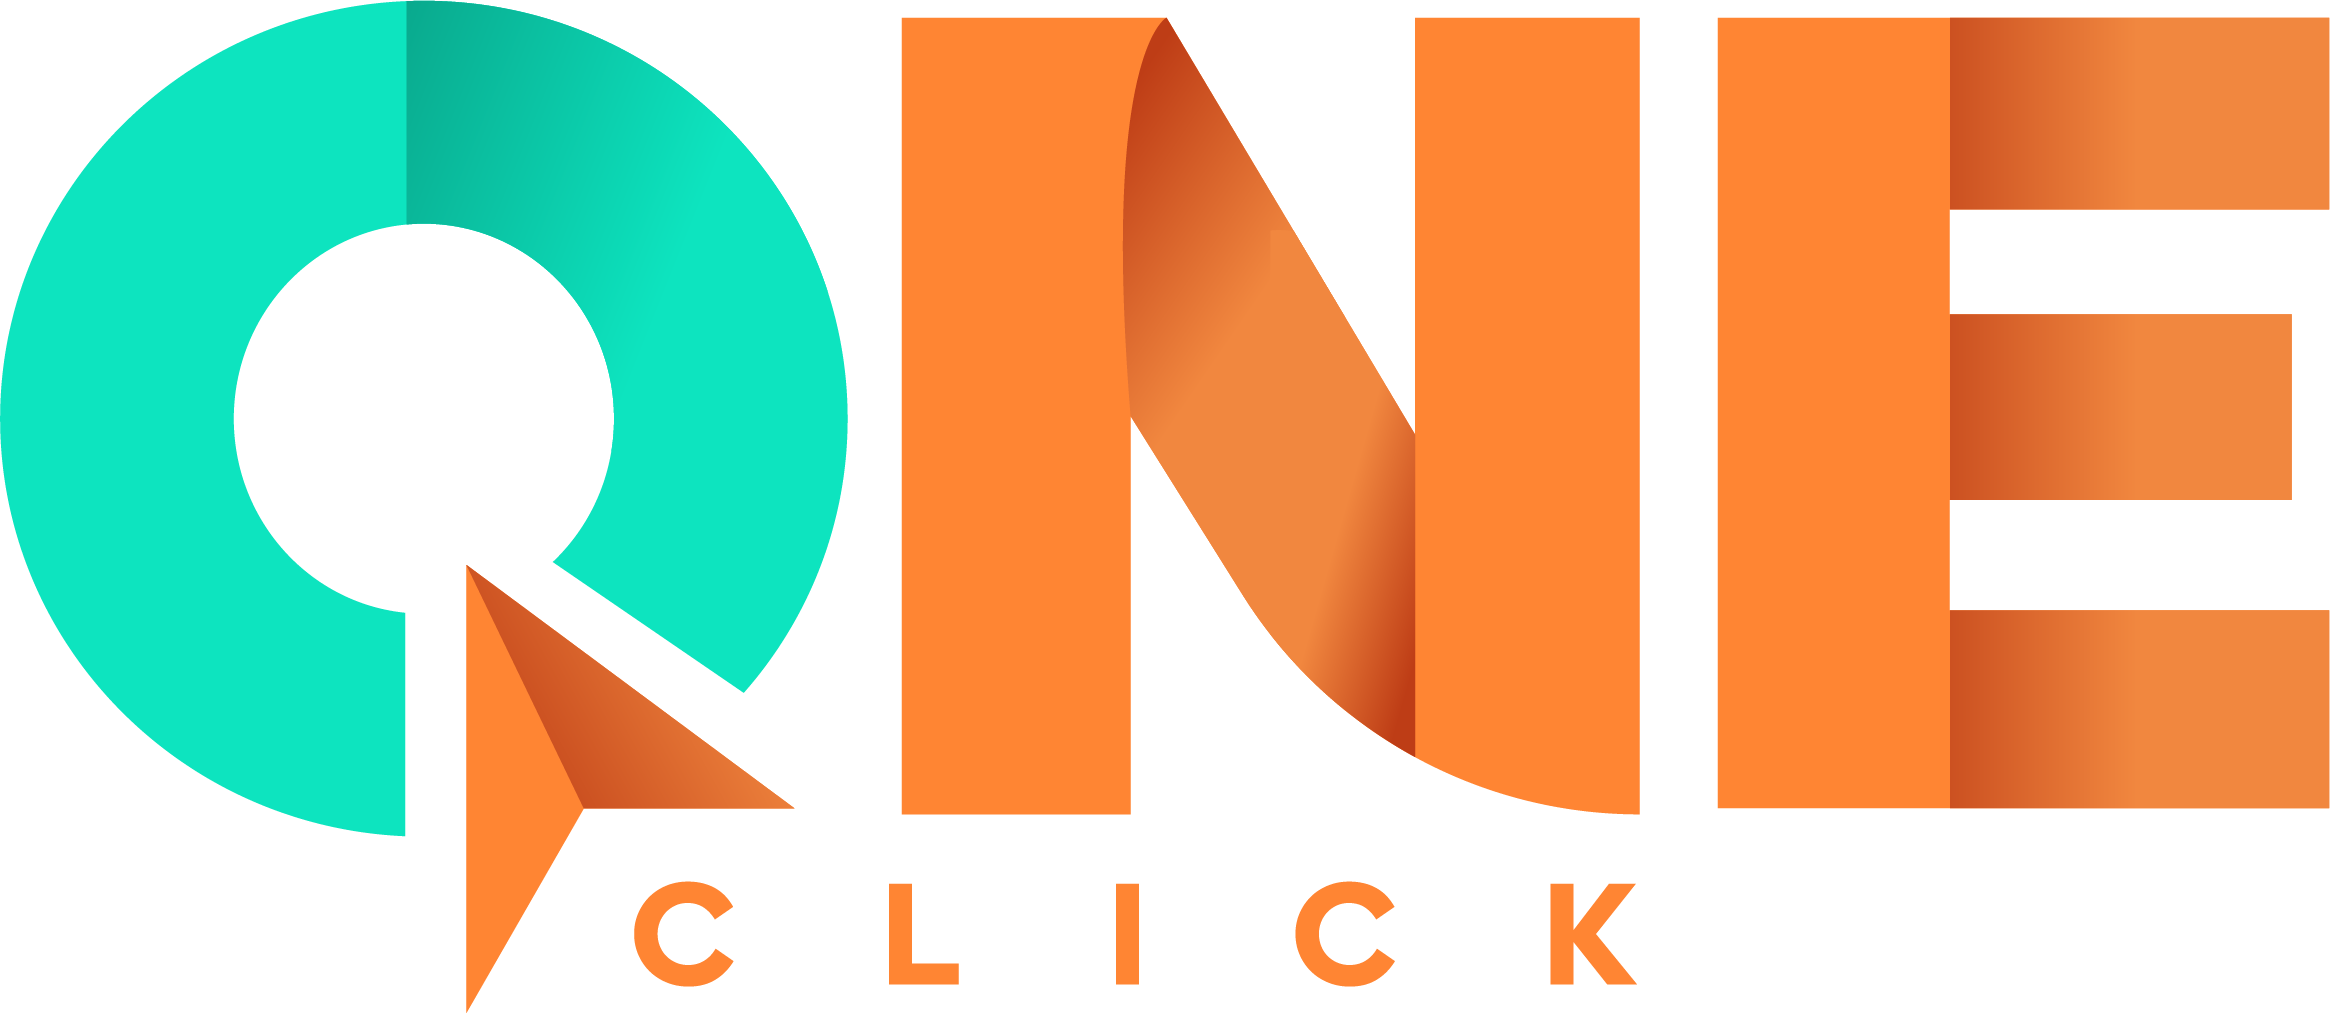 One Click